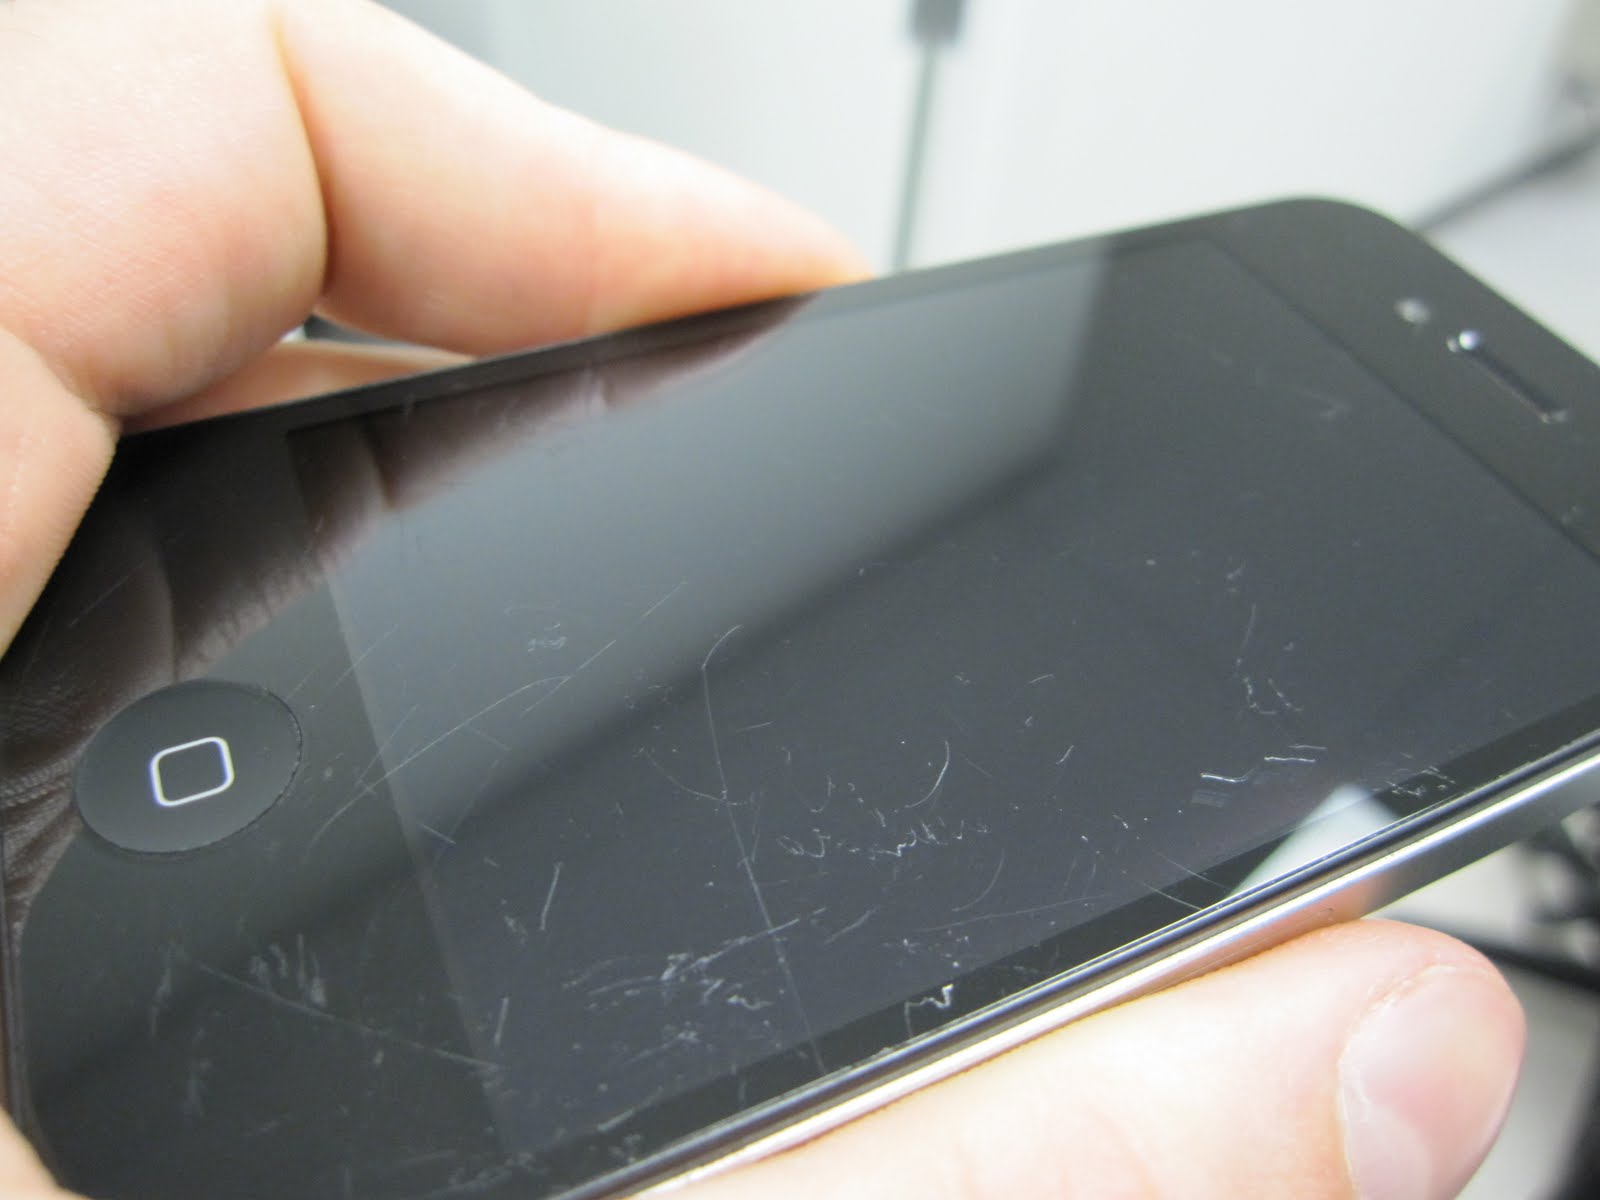 Tips To Remove Scratches From Mobile Screen Scratch Remover For Phone With  Toothpaste Baking Soda 